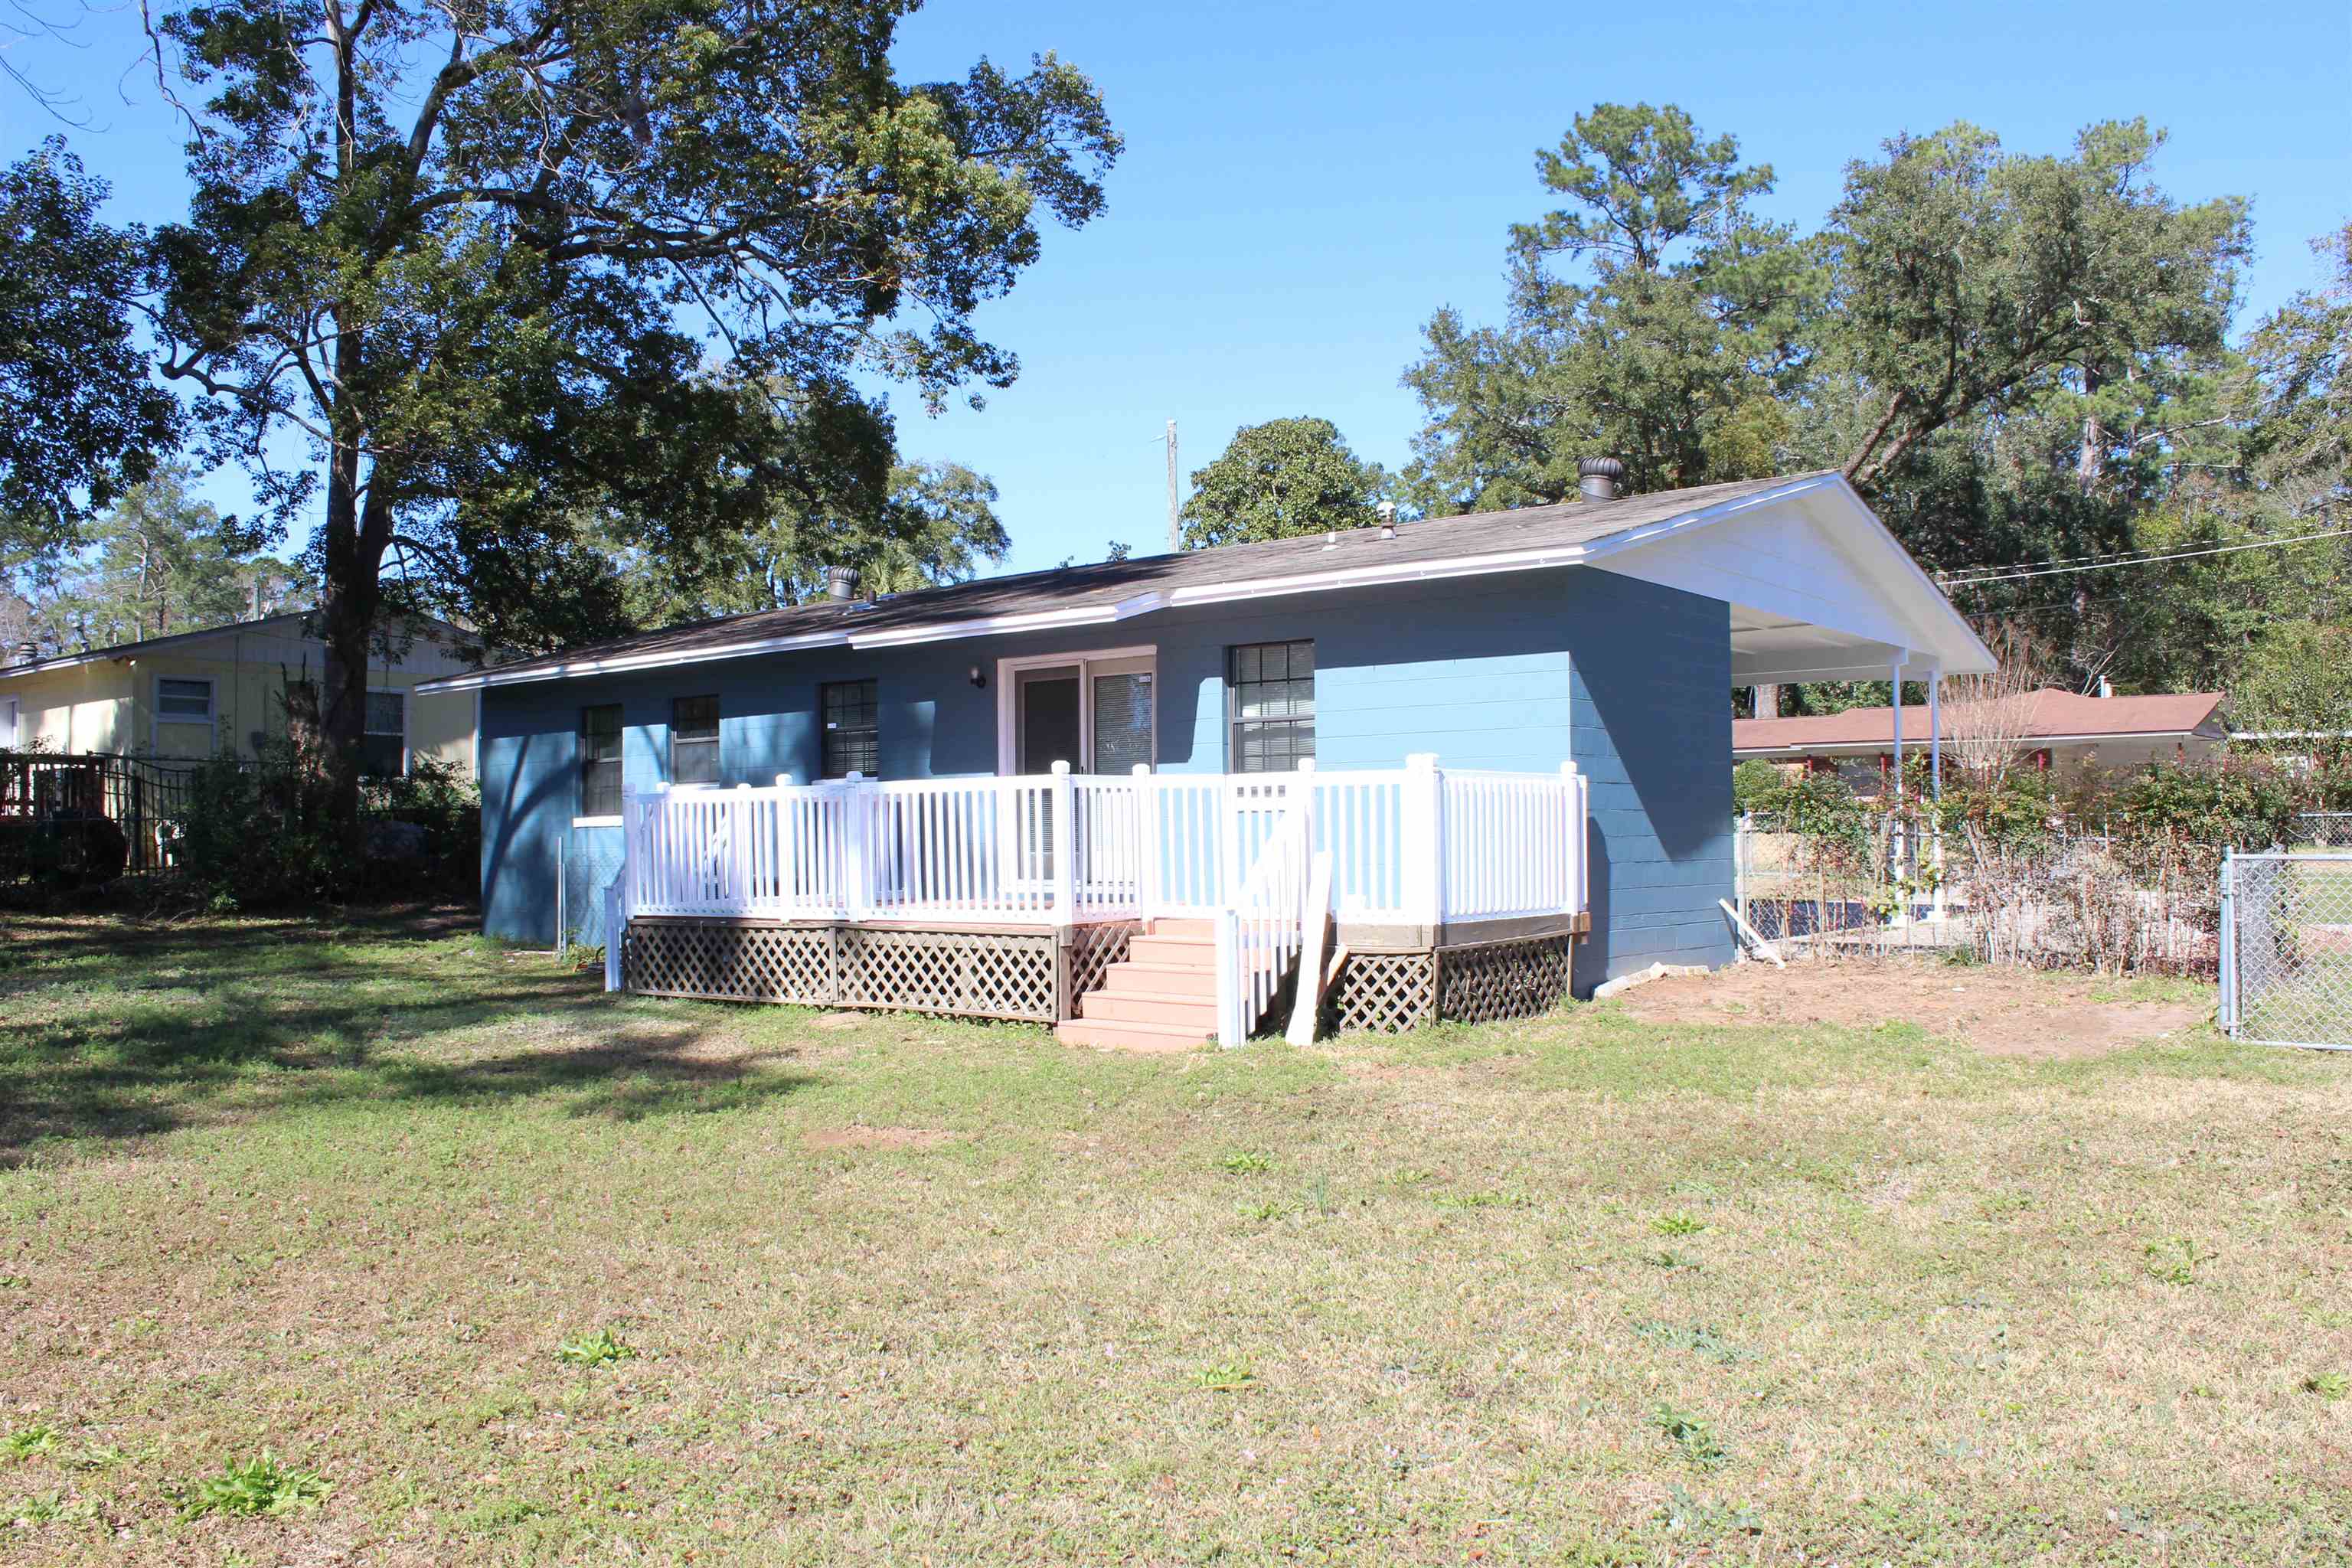 313 Kux Avenue,TALLAHASSEE,Florida 32301,3 Bedrooms Bedrooms,1 BathroomBathrooms,Detached single family,313 Kux Avenue,368060